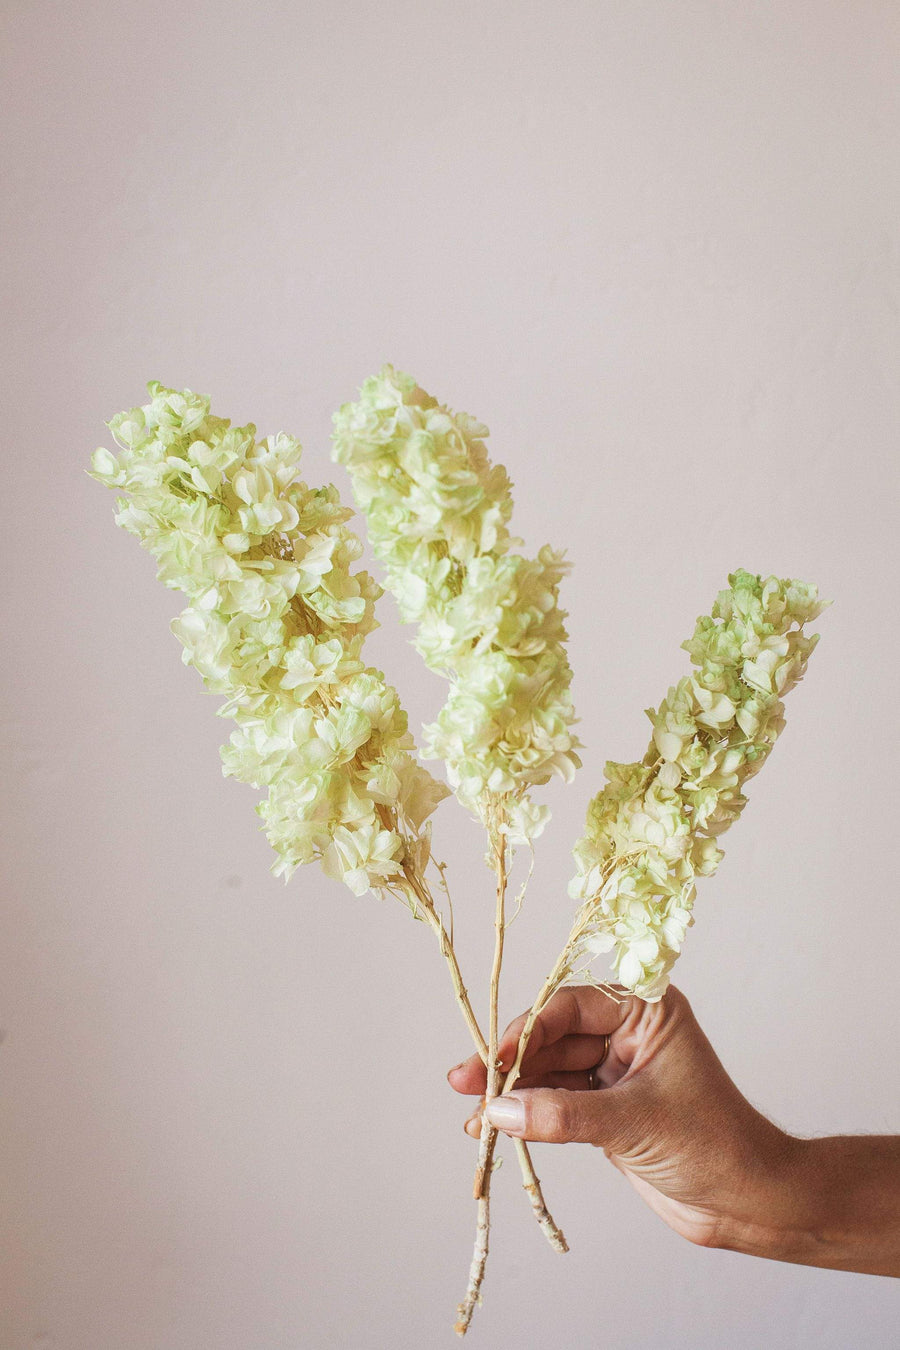 Idlewild Floral Co. Green Lace Hydrangea